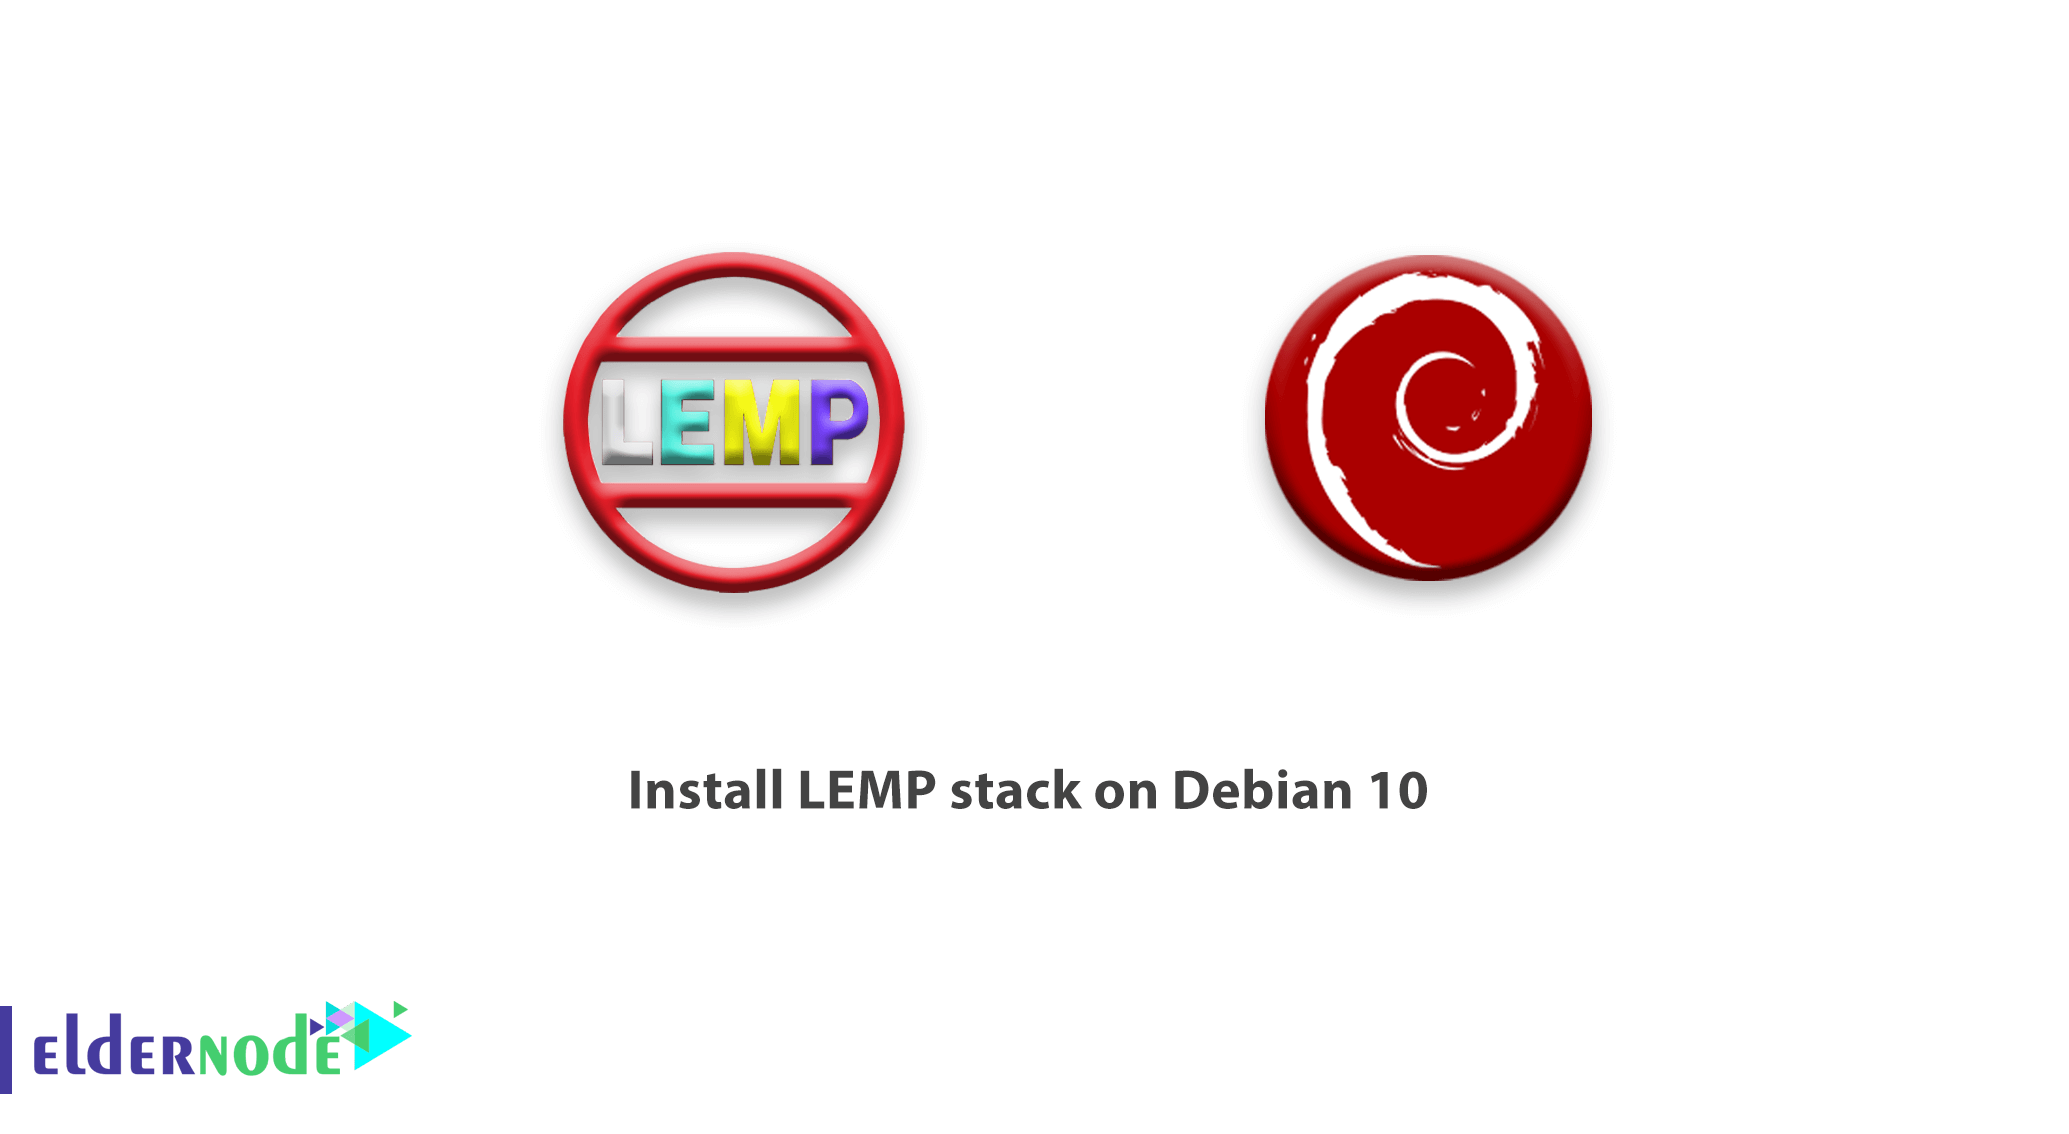 How to install LEMP stack on Debian 10